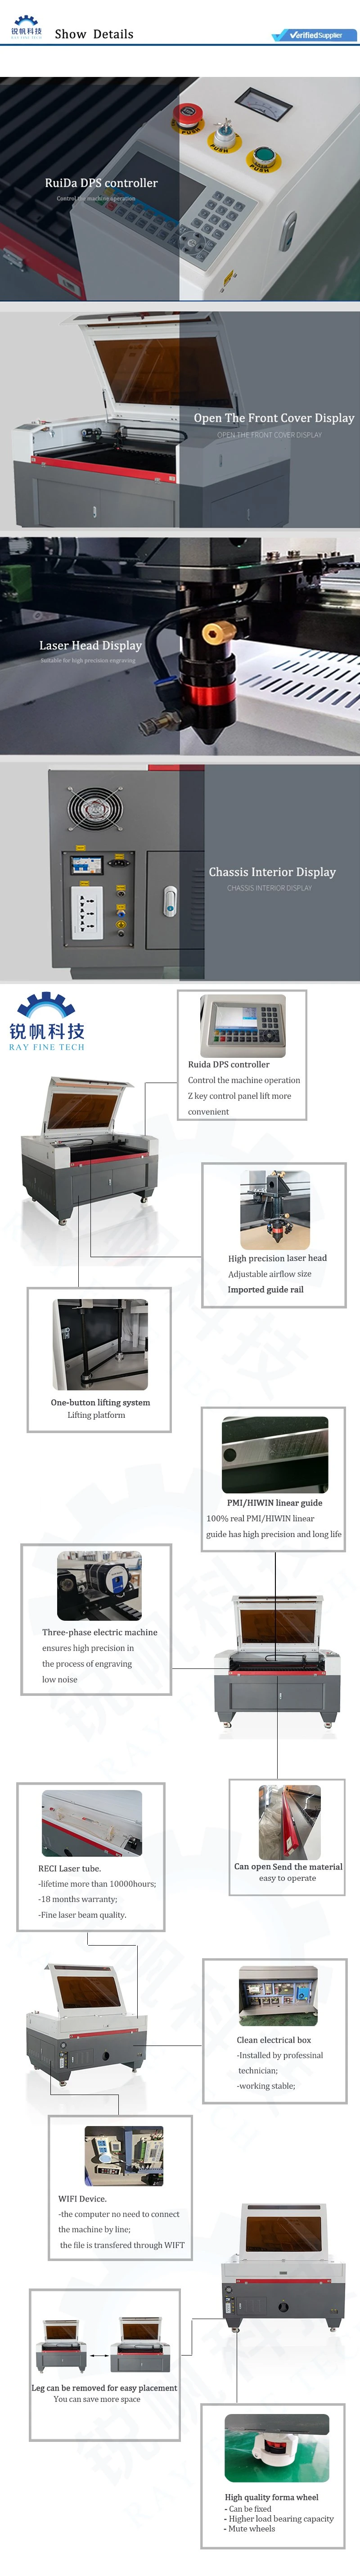 1390 Laser Cutting Machine and Building Material Shops Applicable Industries Laser Cutting Machine